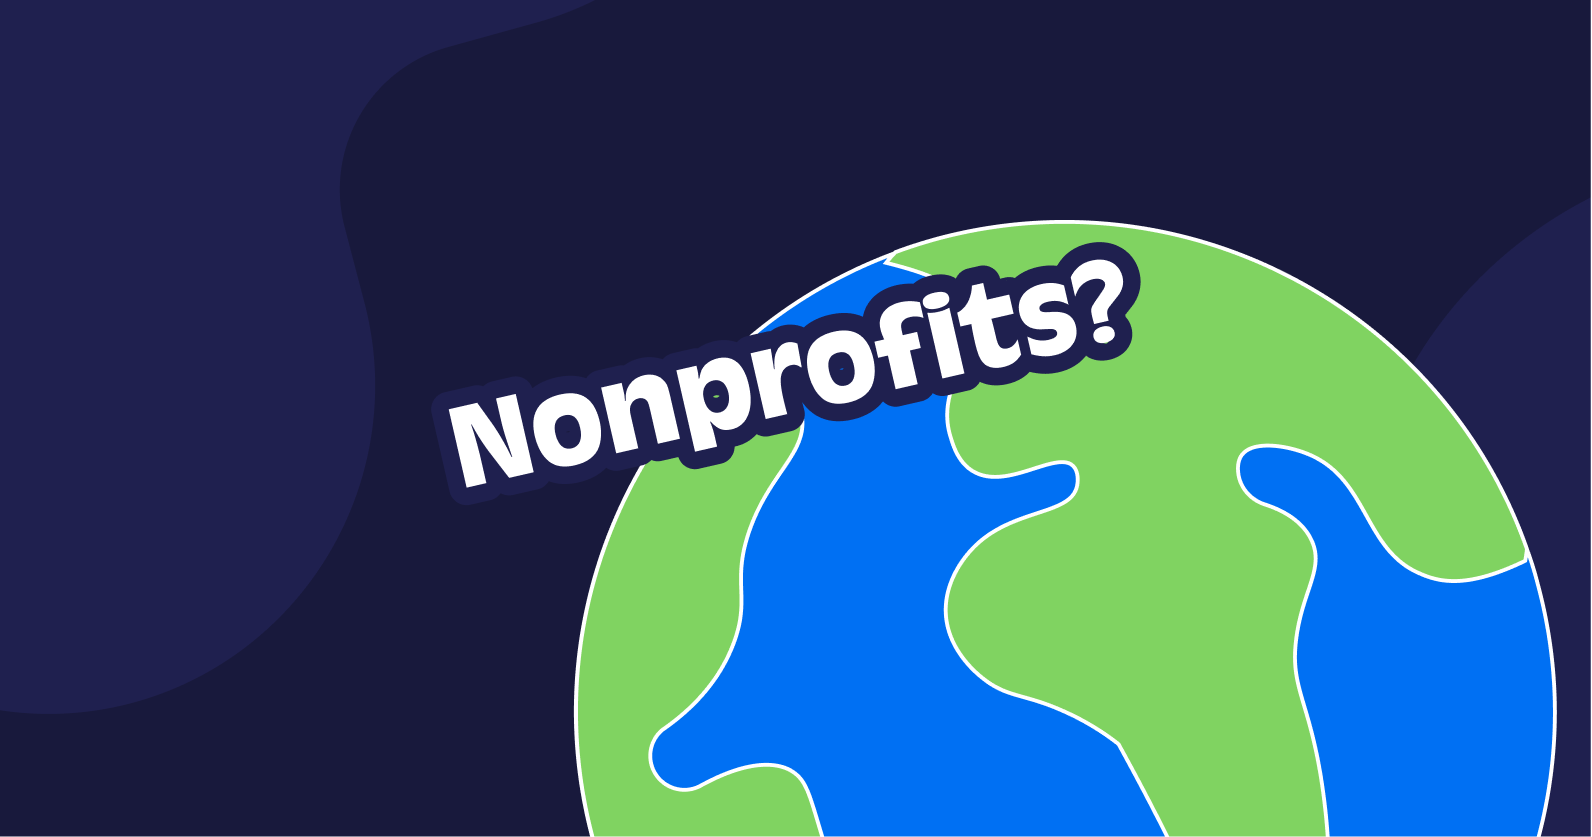 Illustration of the globe and the word "nonprofits?".